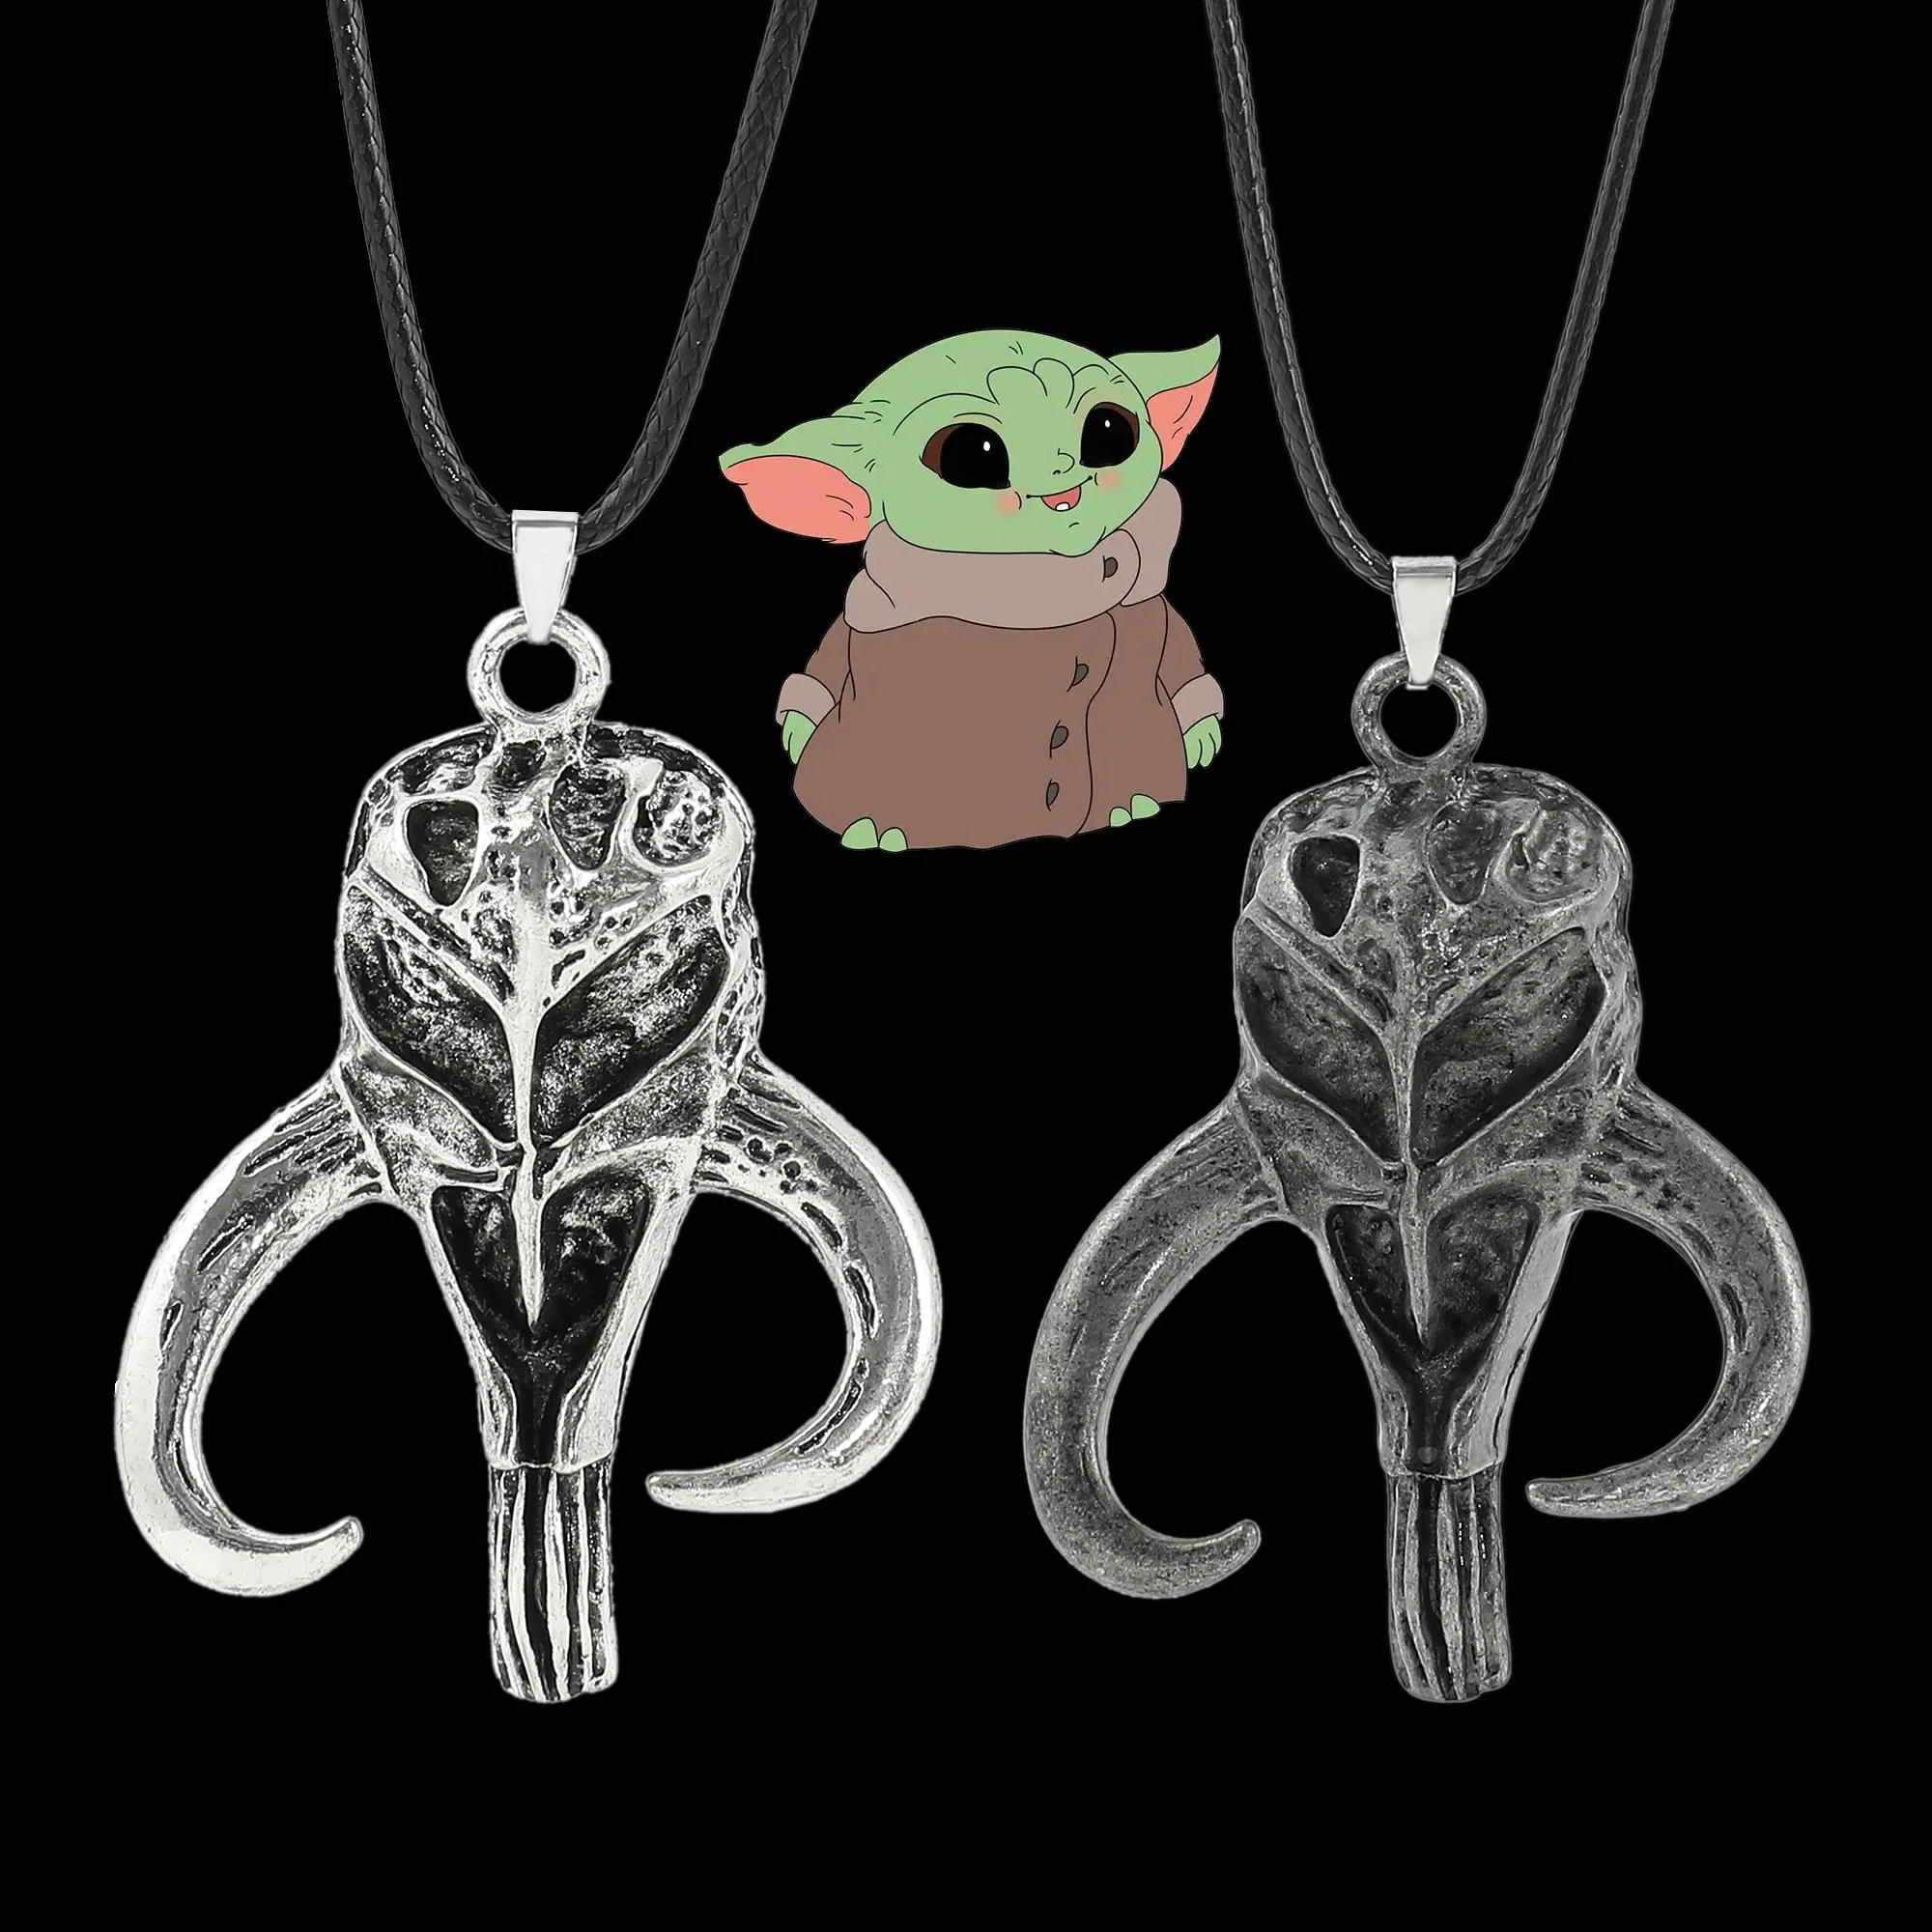 

Movie Star Wars Retro Mandalorian Necklace Yoda Baby Leather Cord Necklace Disney Christmas Jewelry Accessories Gift for Men